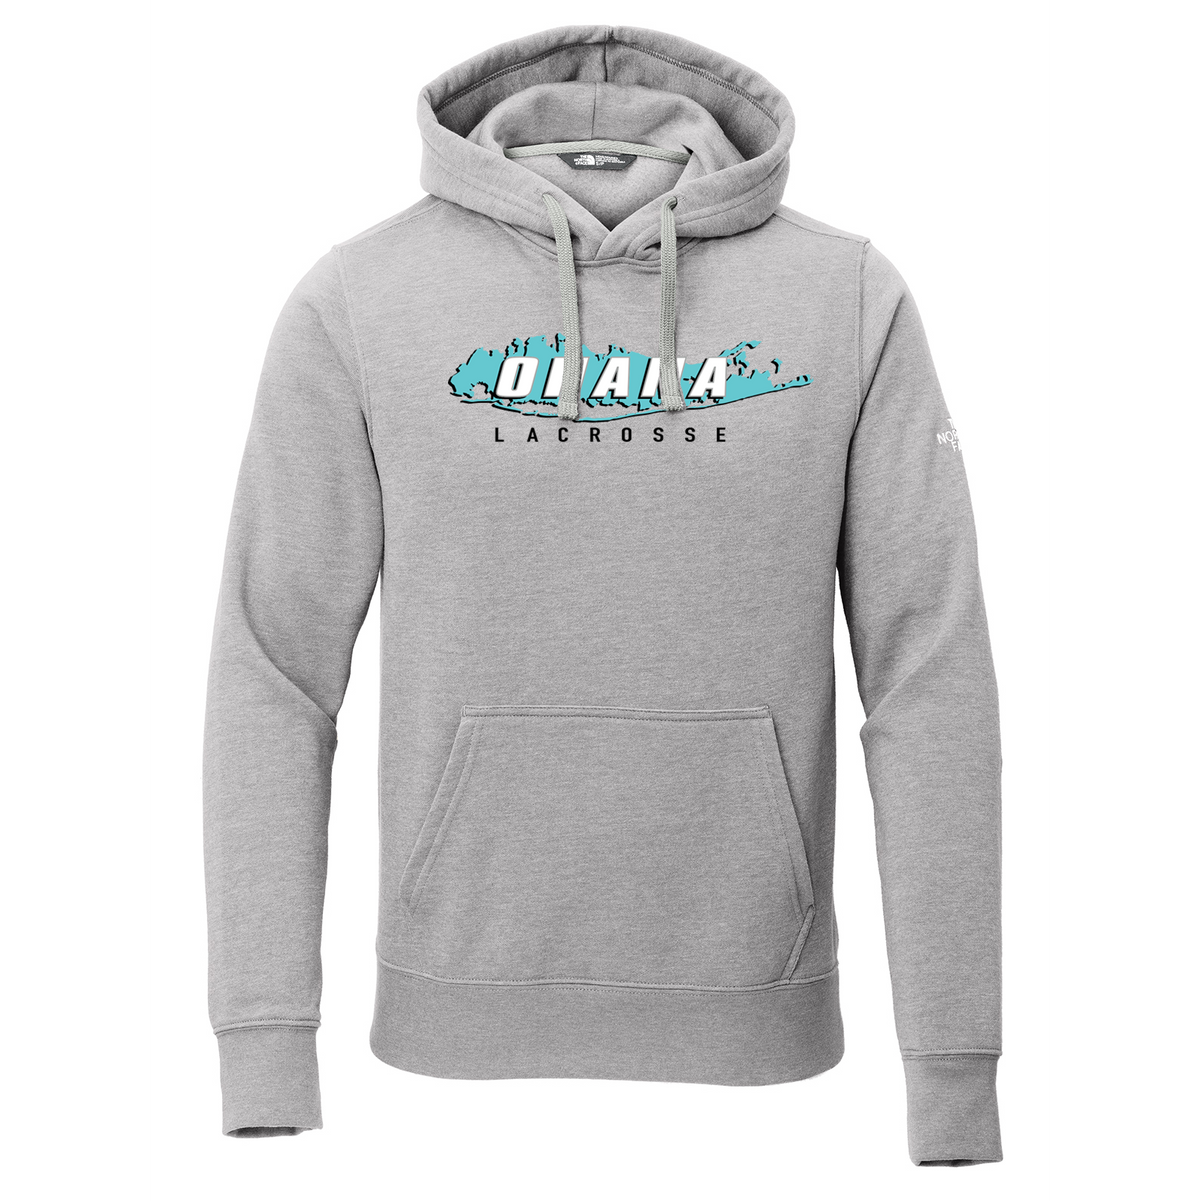 Ohana Girls Lacrosse The North Face Pullover Hoodie